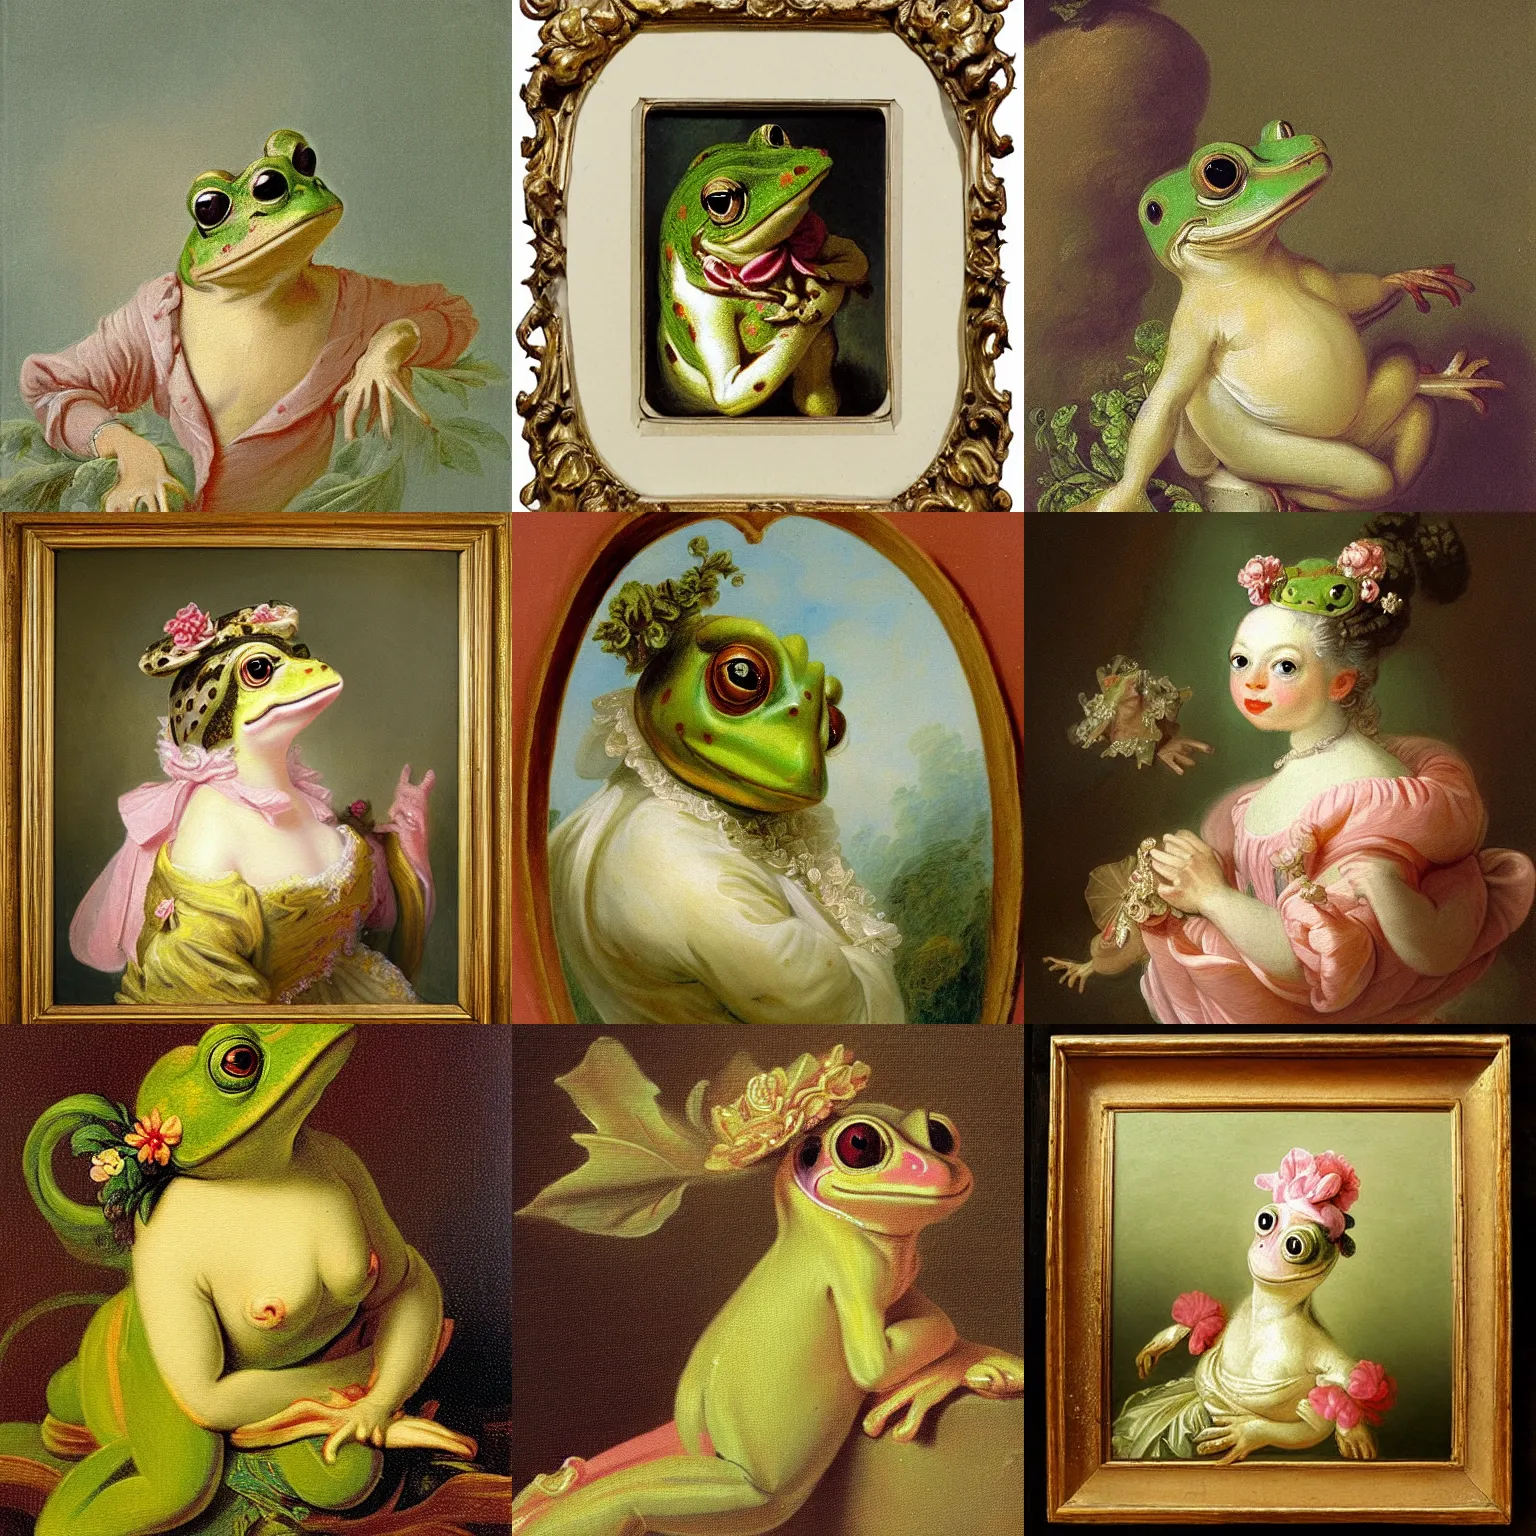 Prompt: portrait rococo painting of Princess frog by Jean‑Honoré Fragonard